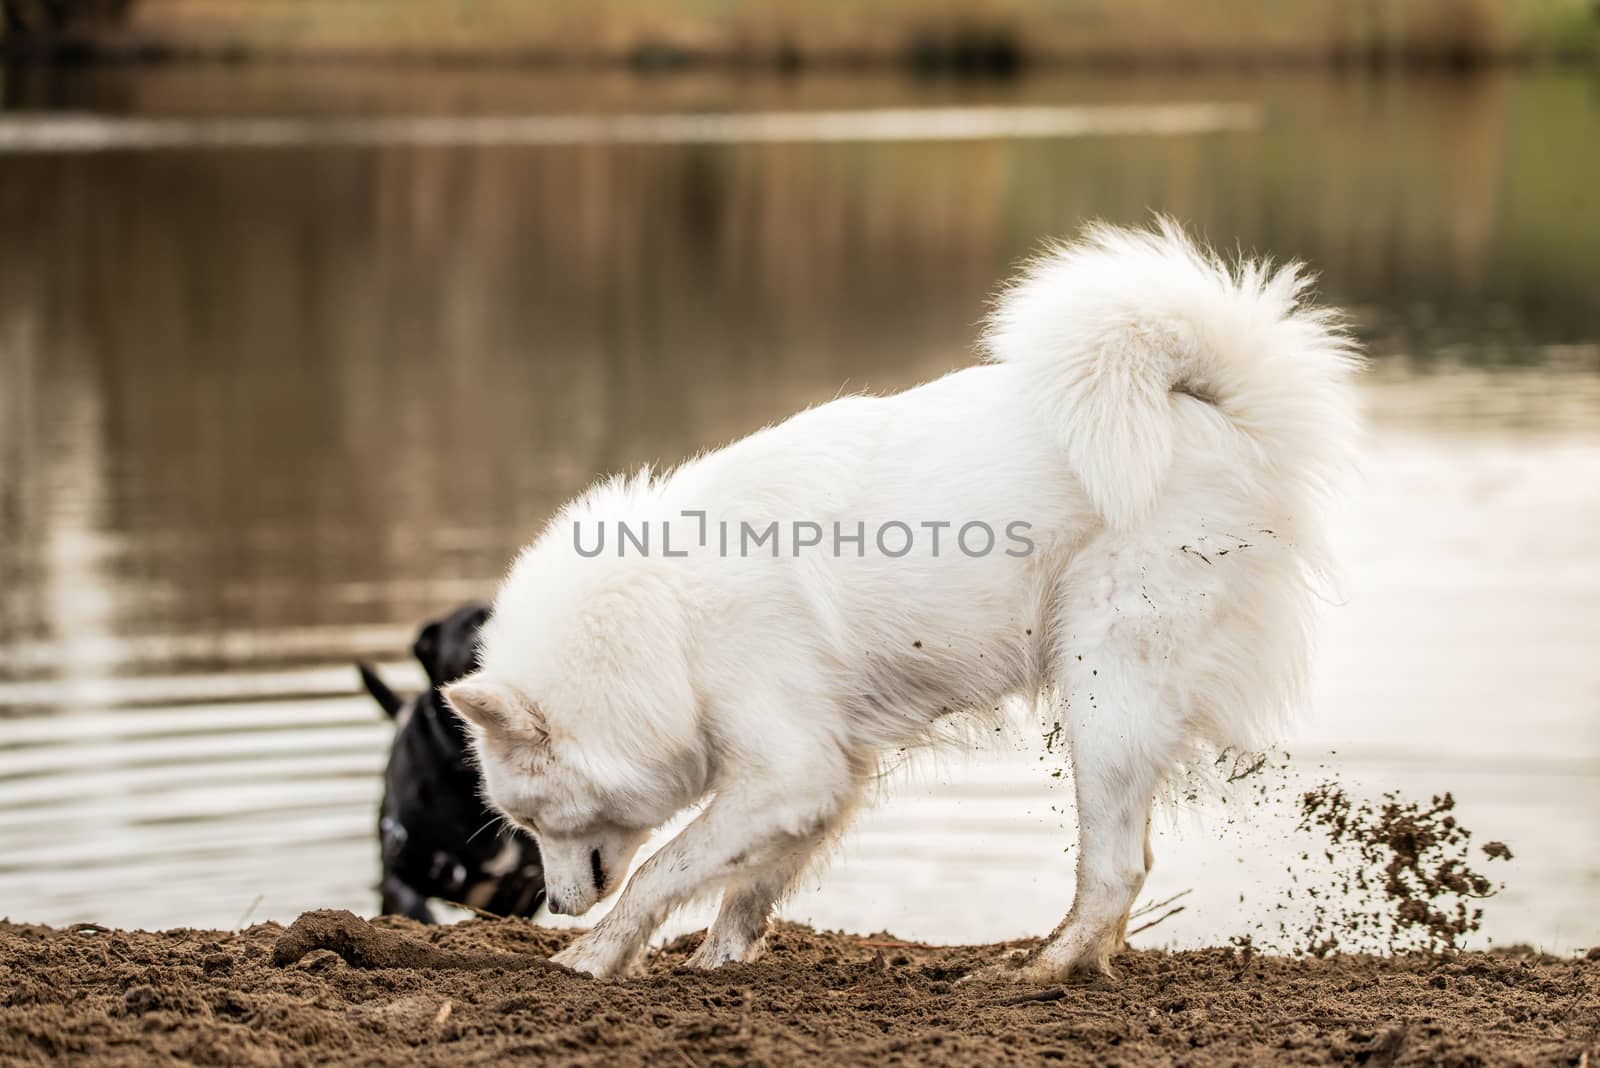 Cute, fluffy white Samoyed dog digs a hole in the dirt by Pendleton